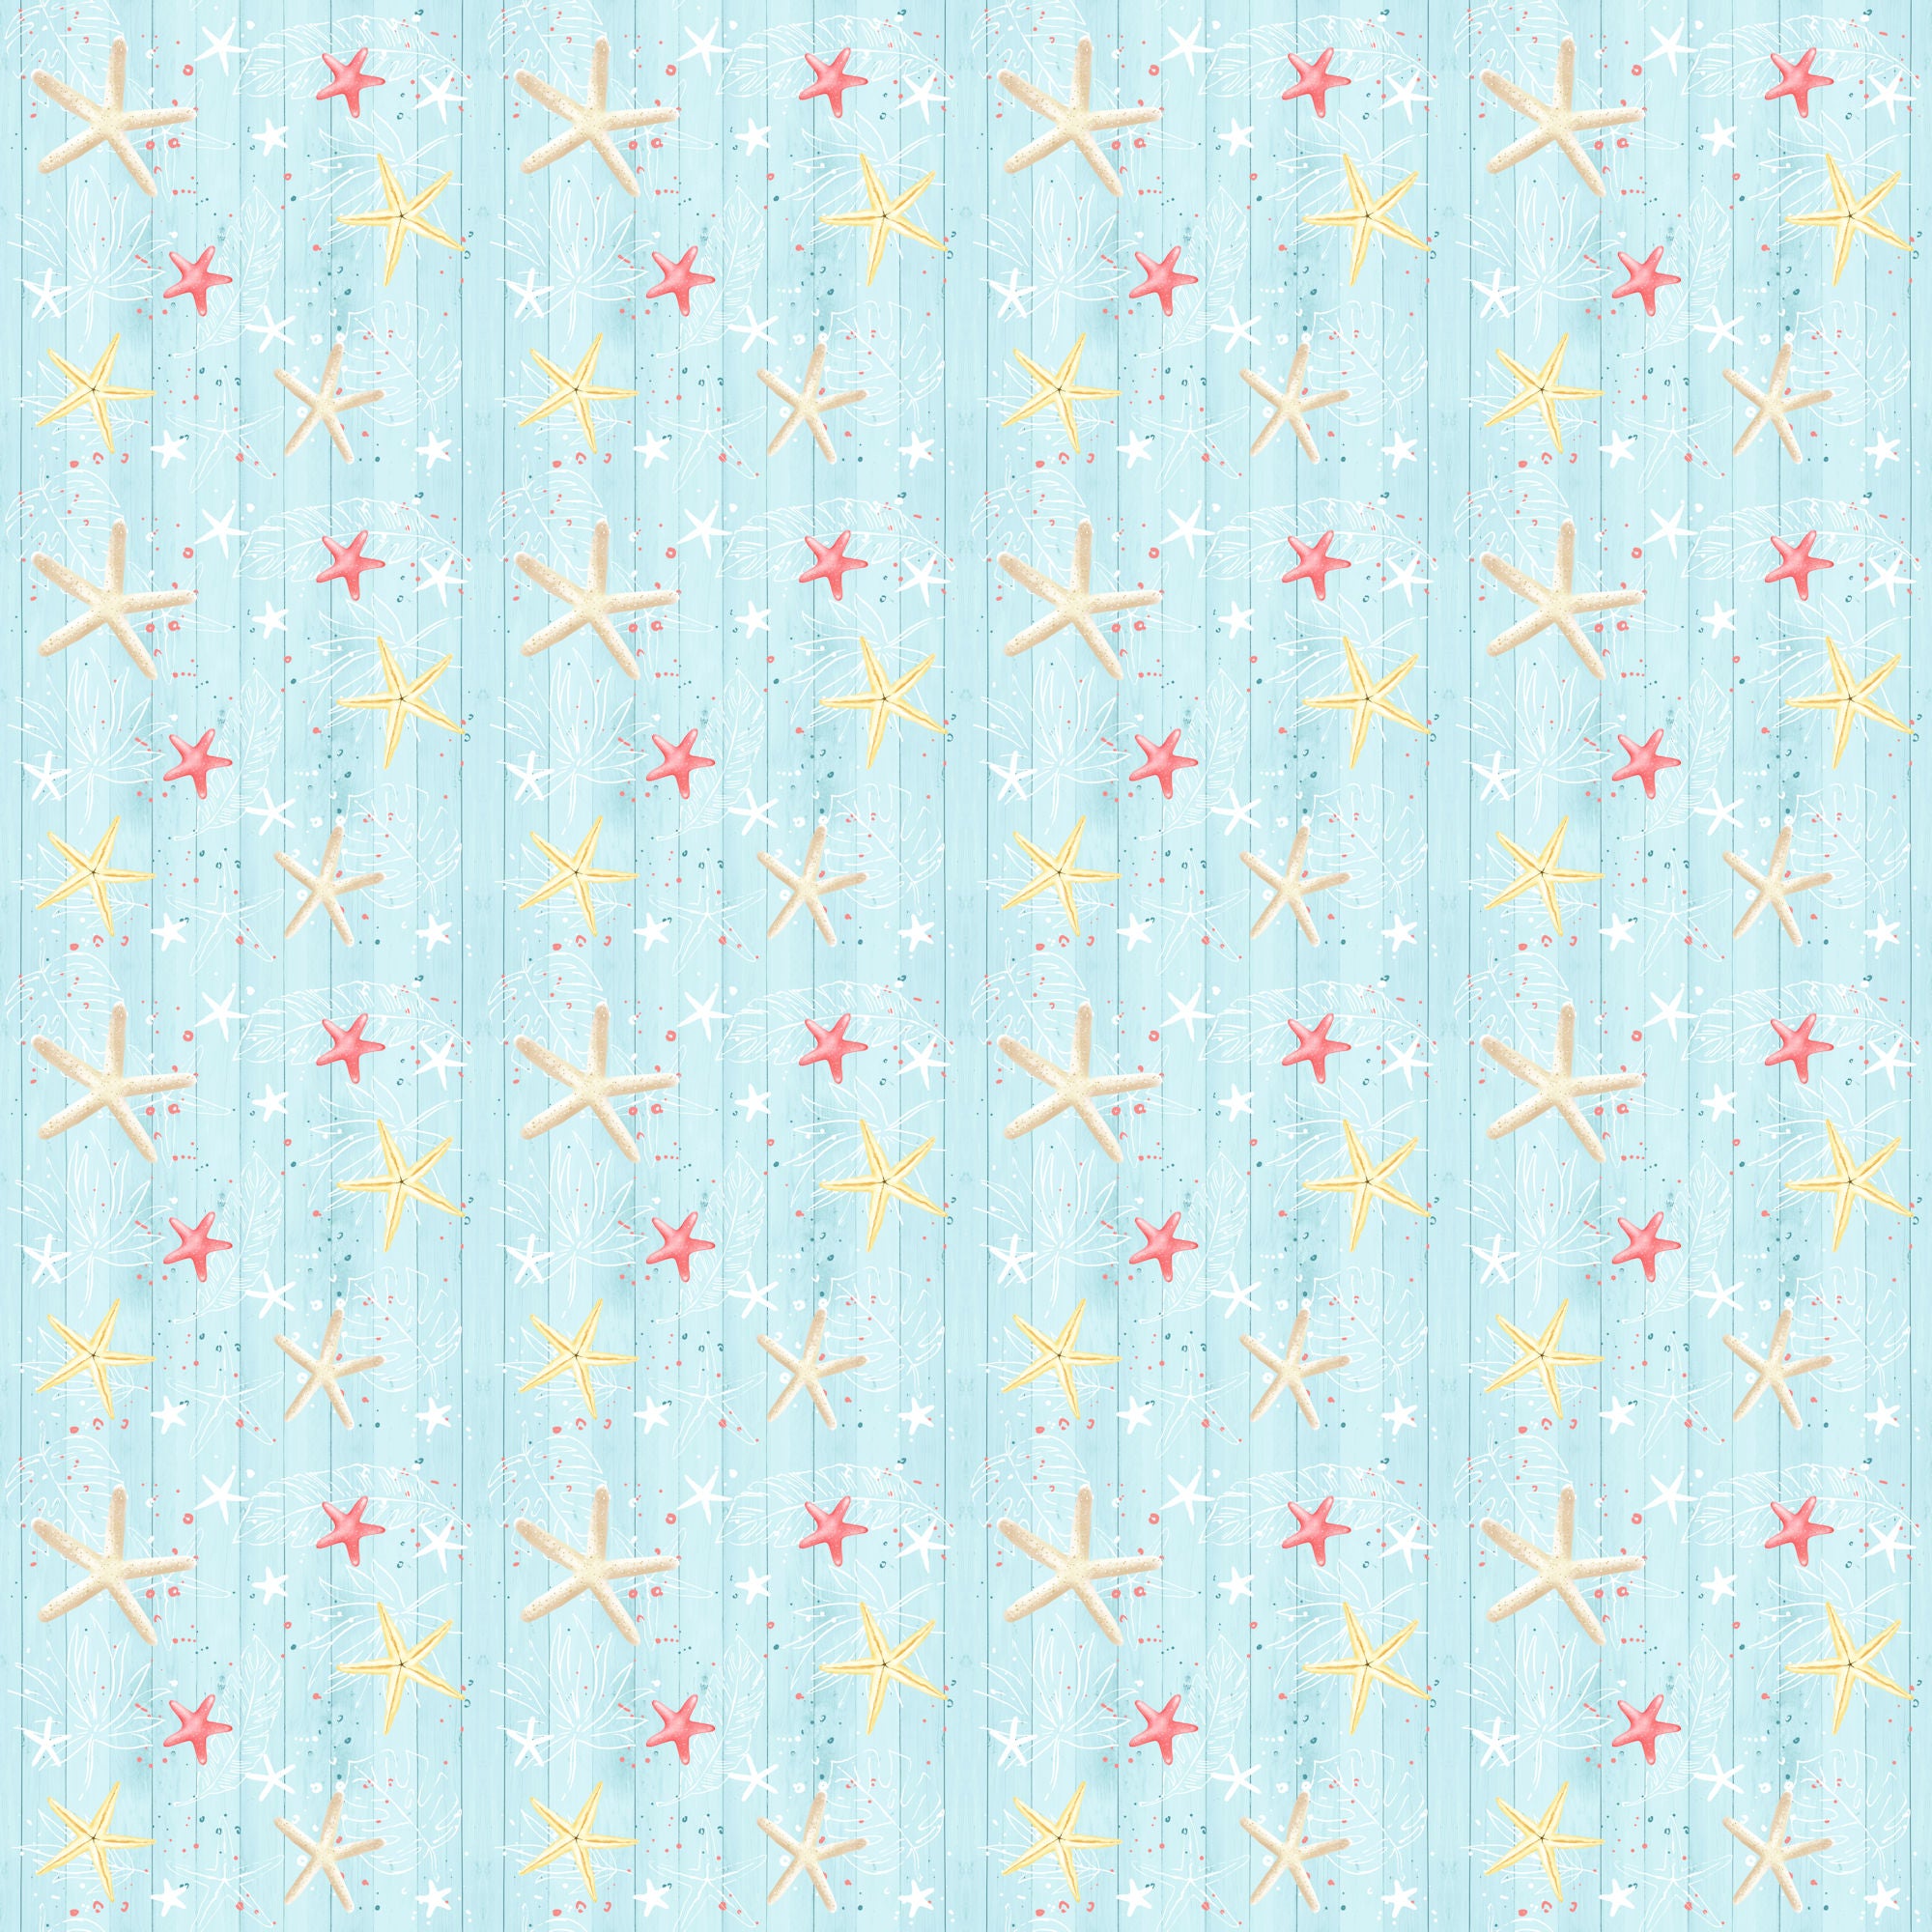 Nautical Summer Collection Seashell Stripes 12 x 12 Double-Sided Scrapbook Paper by SSC Designs